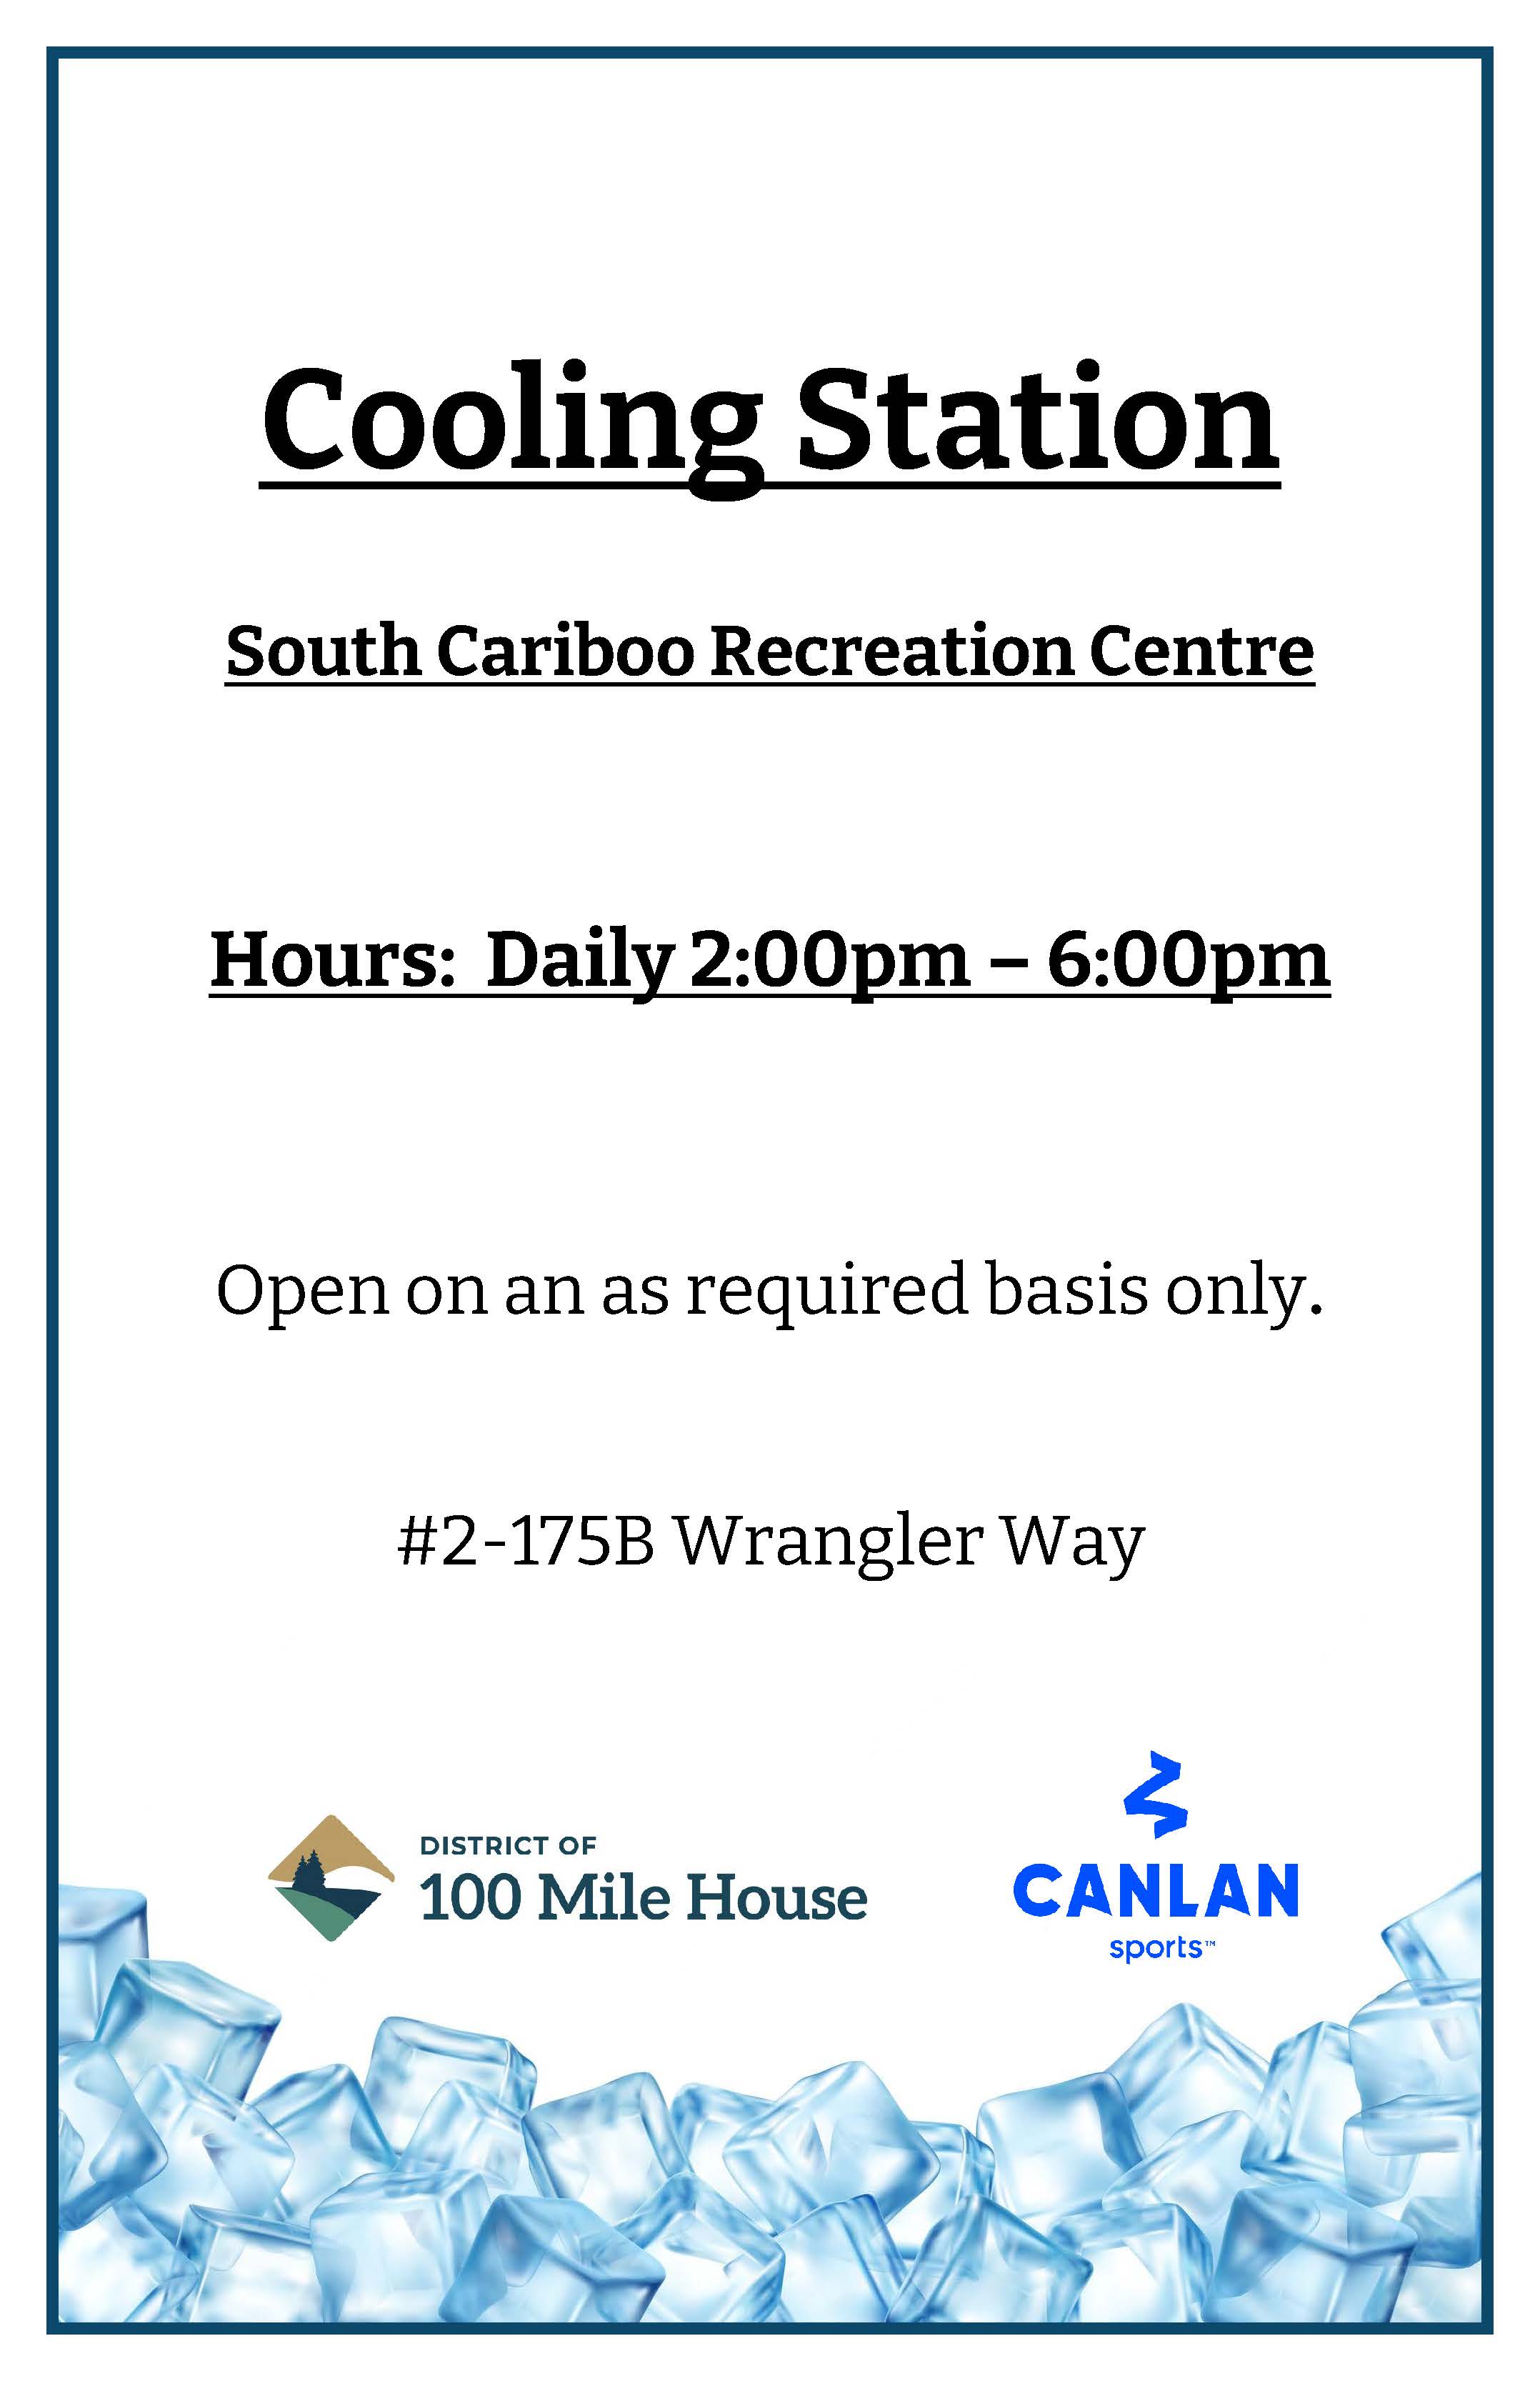 Cooling Station 2022 with address.jpg